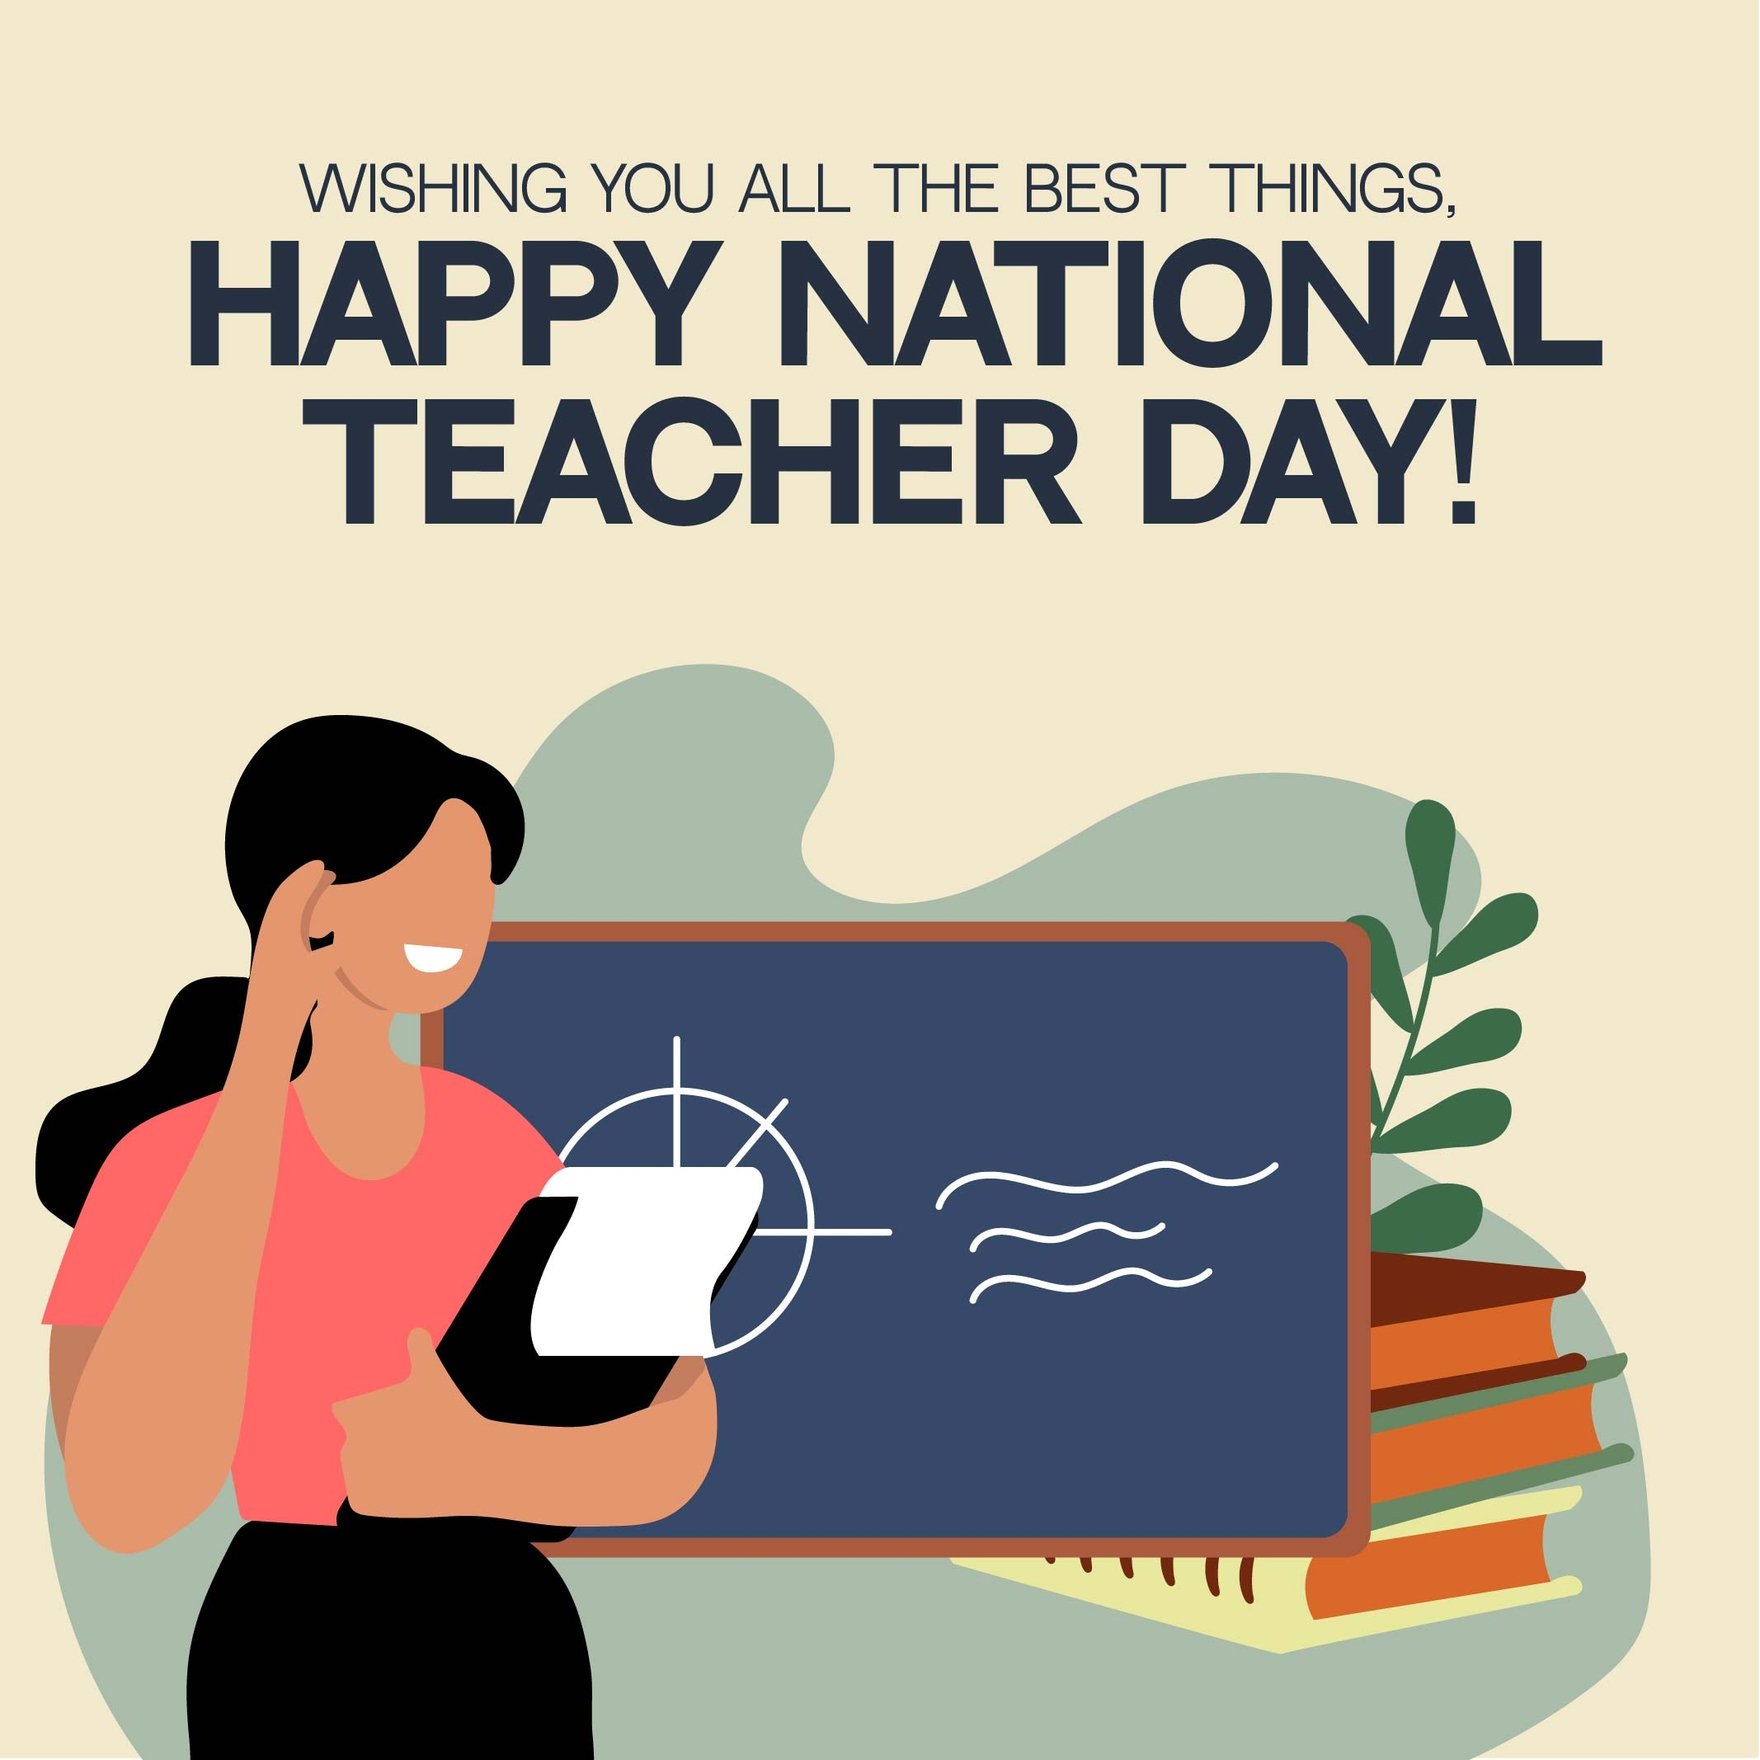 Free National Teacher Day Wishes Vector